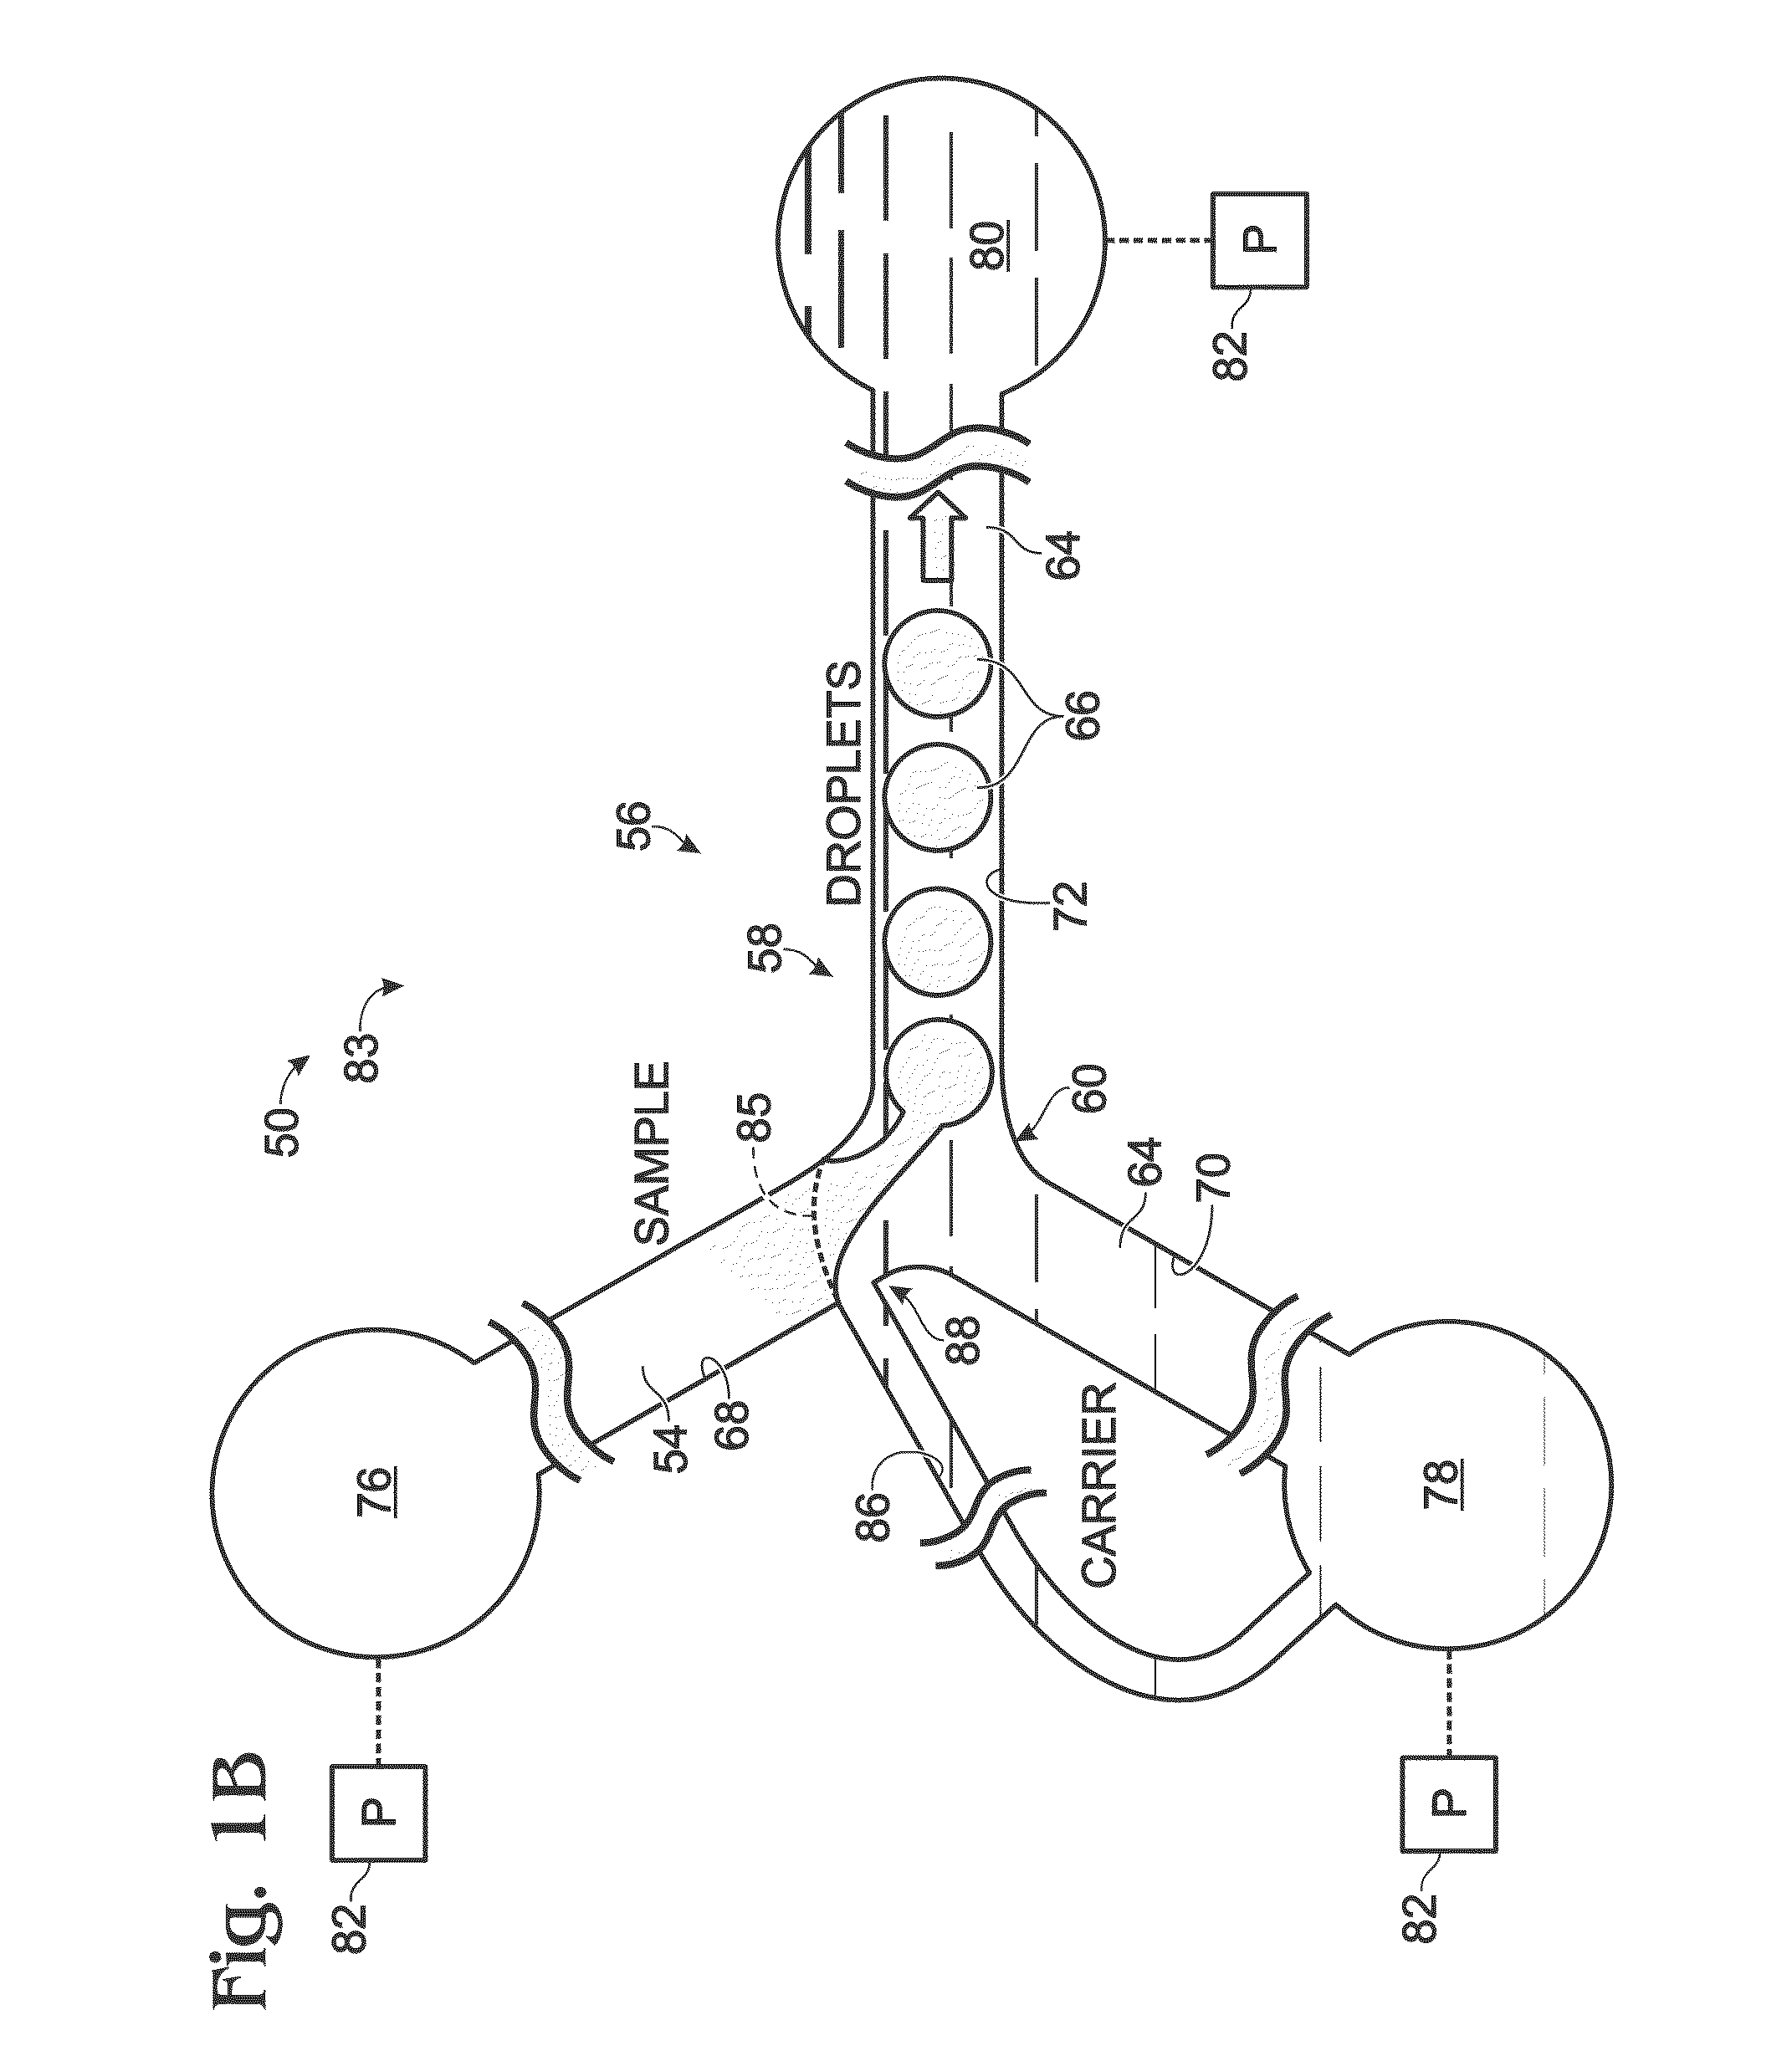 Droplet generation system with features for sample positioning